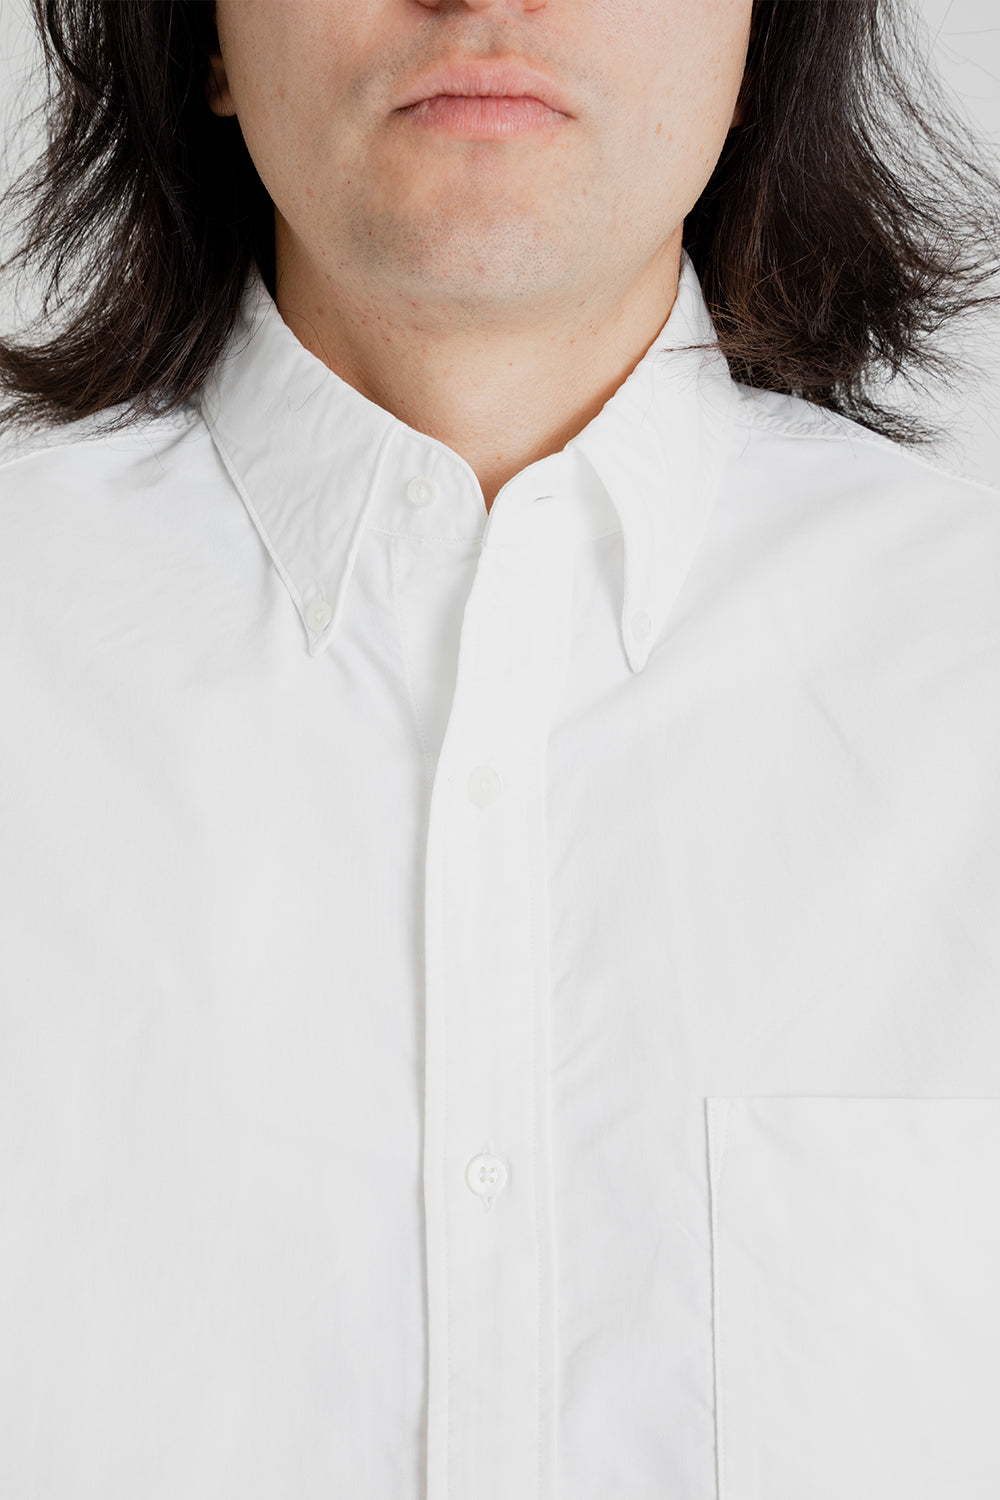 Nanamica Button Down Wind Short Sleeve Shirt in White